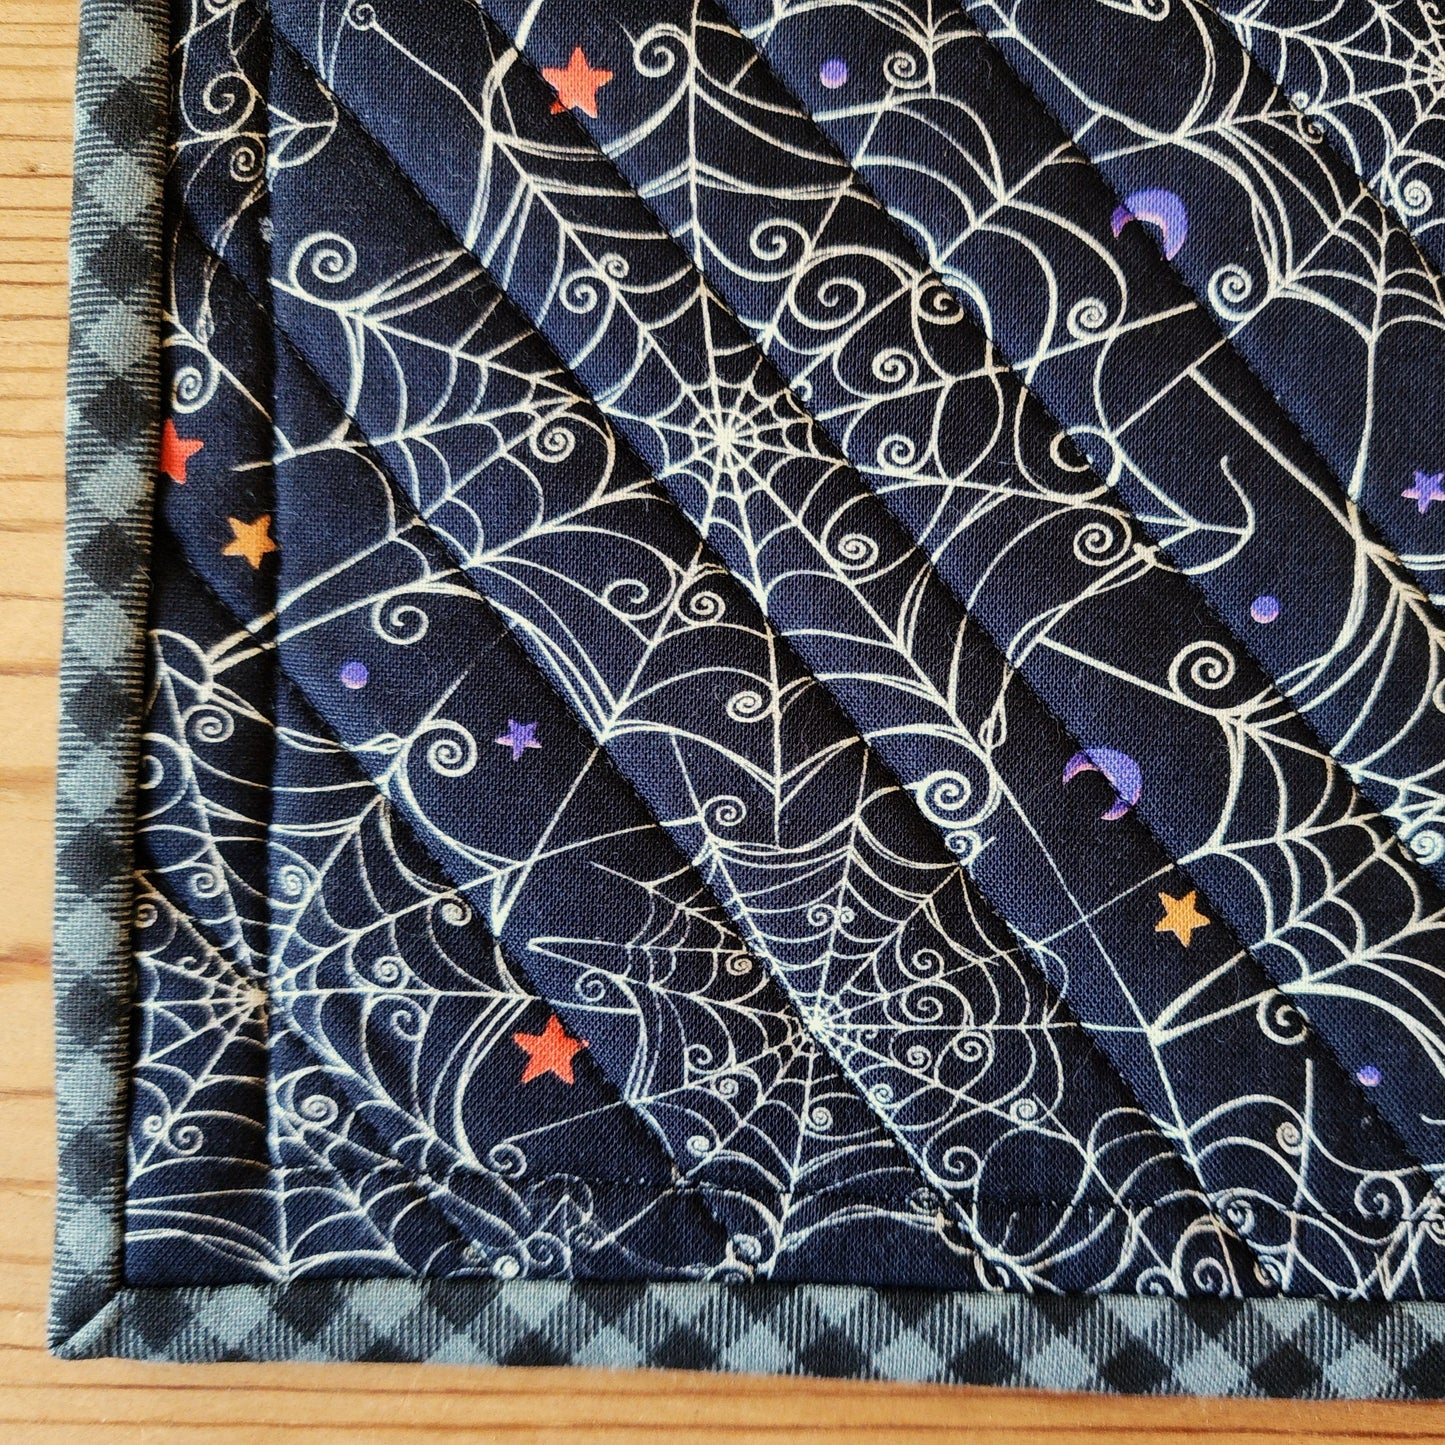 Halloween Quilted Table Runner - Glow in the Dark Stars